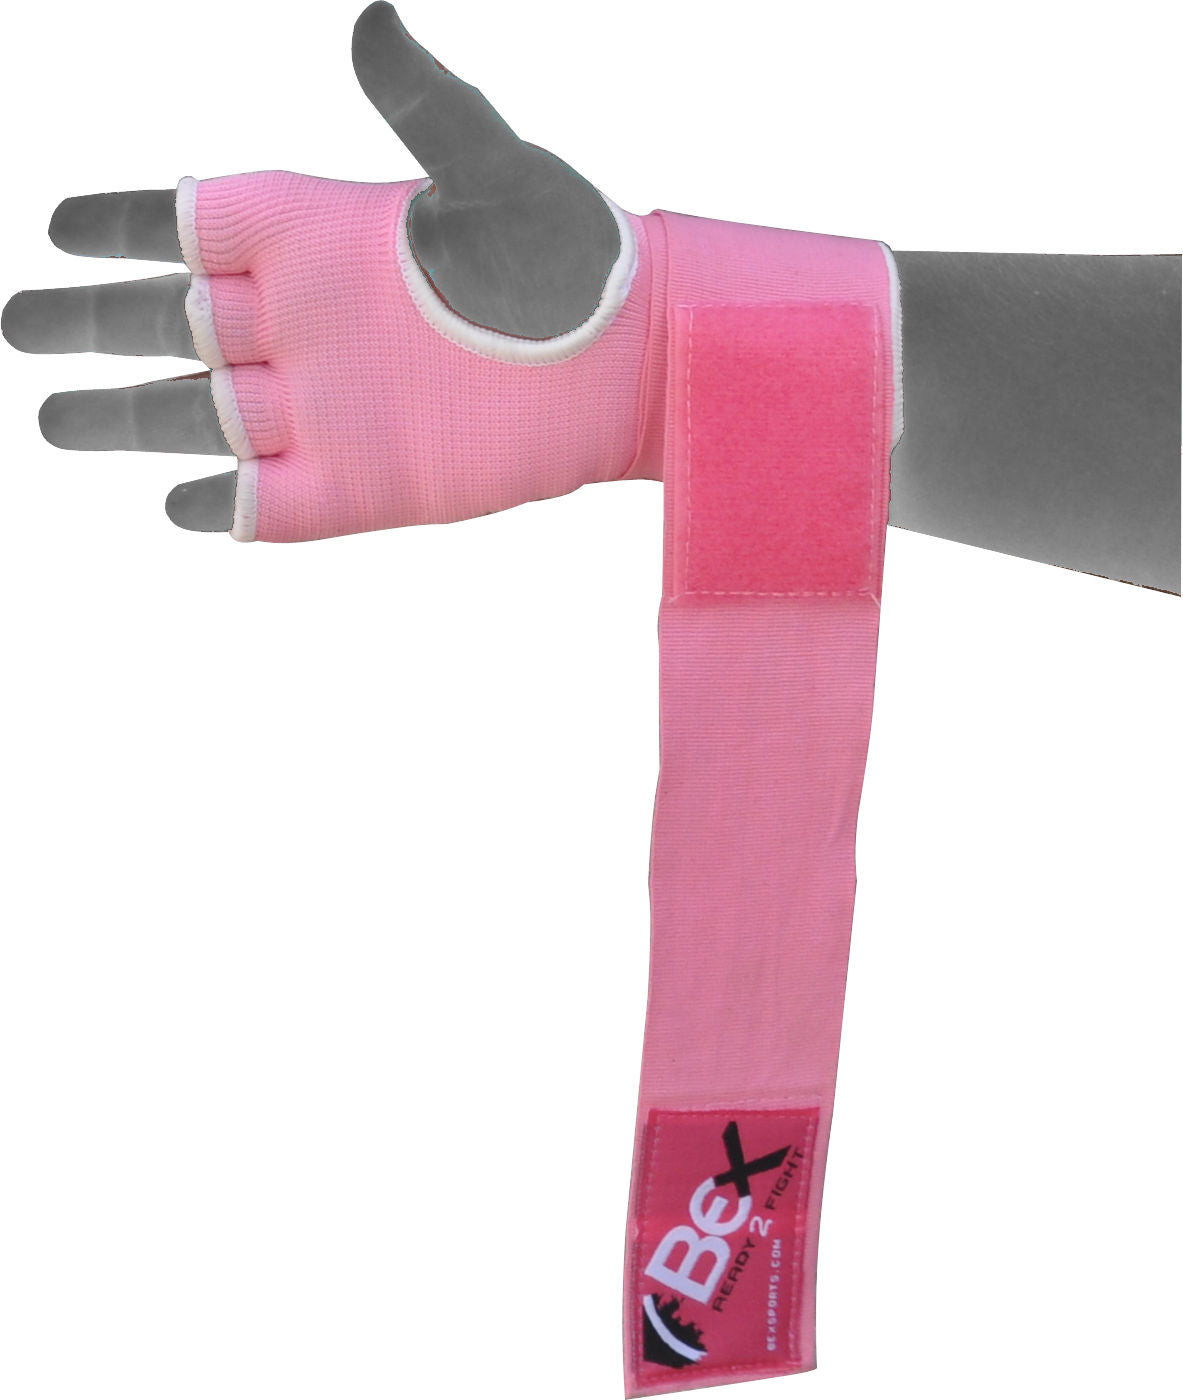 Pink Power: Elevate Your MMA Game with Inner Pad Gloves